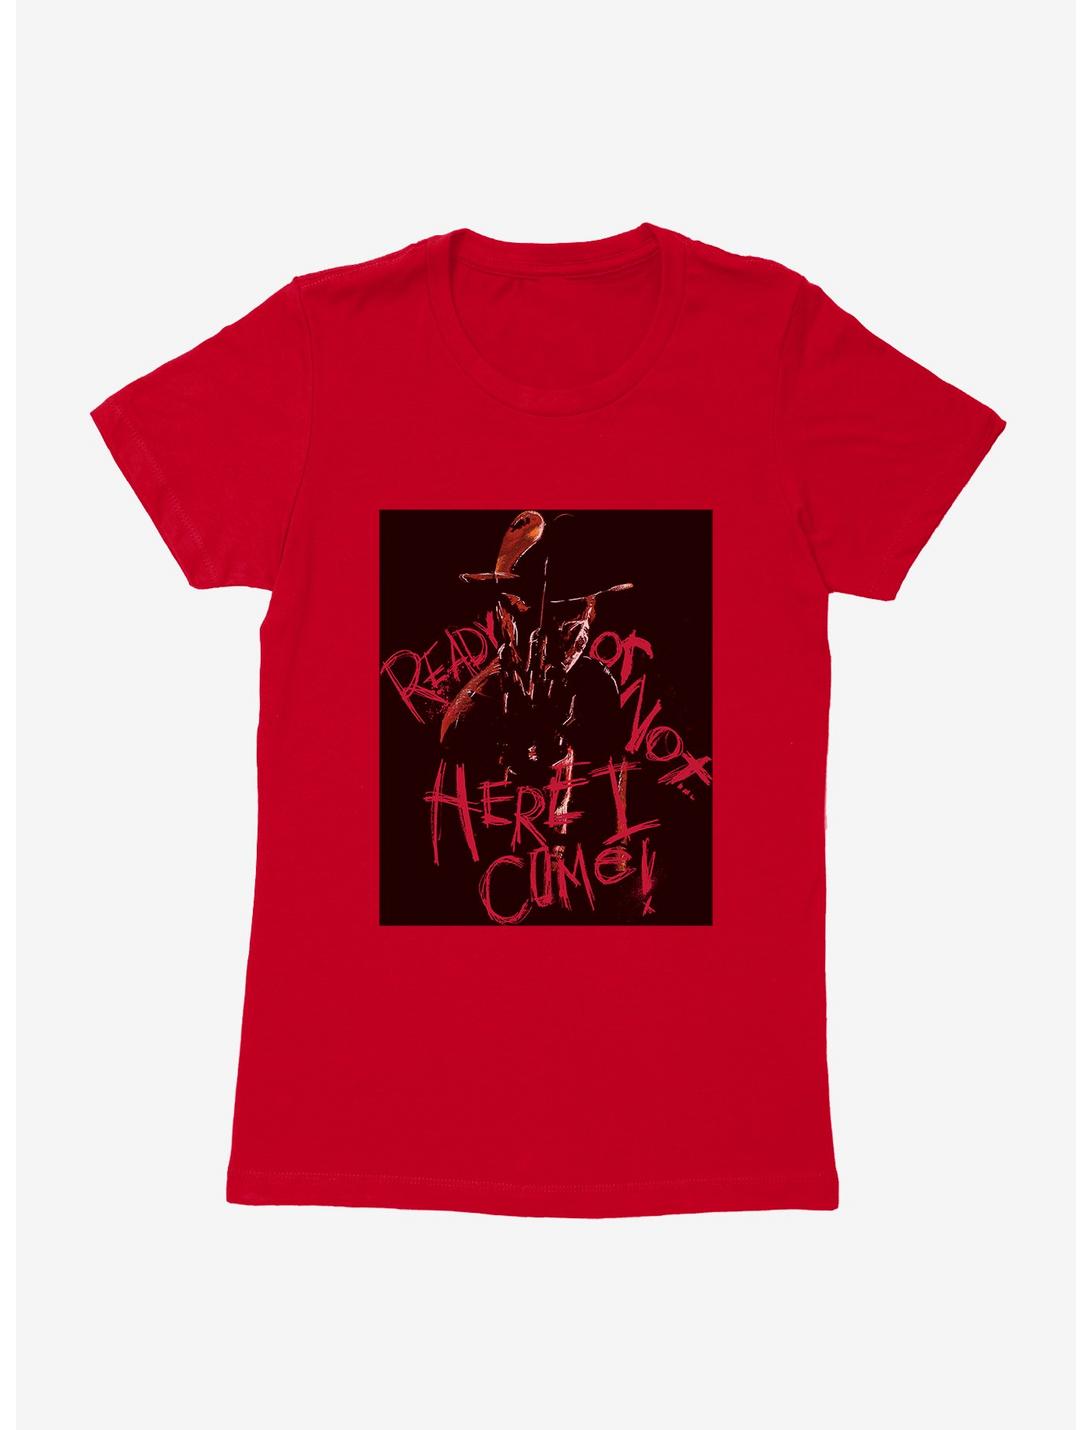 A Nightmare On Elm Street Ready Or Not Womens T-Shirt, RED, hi-res